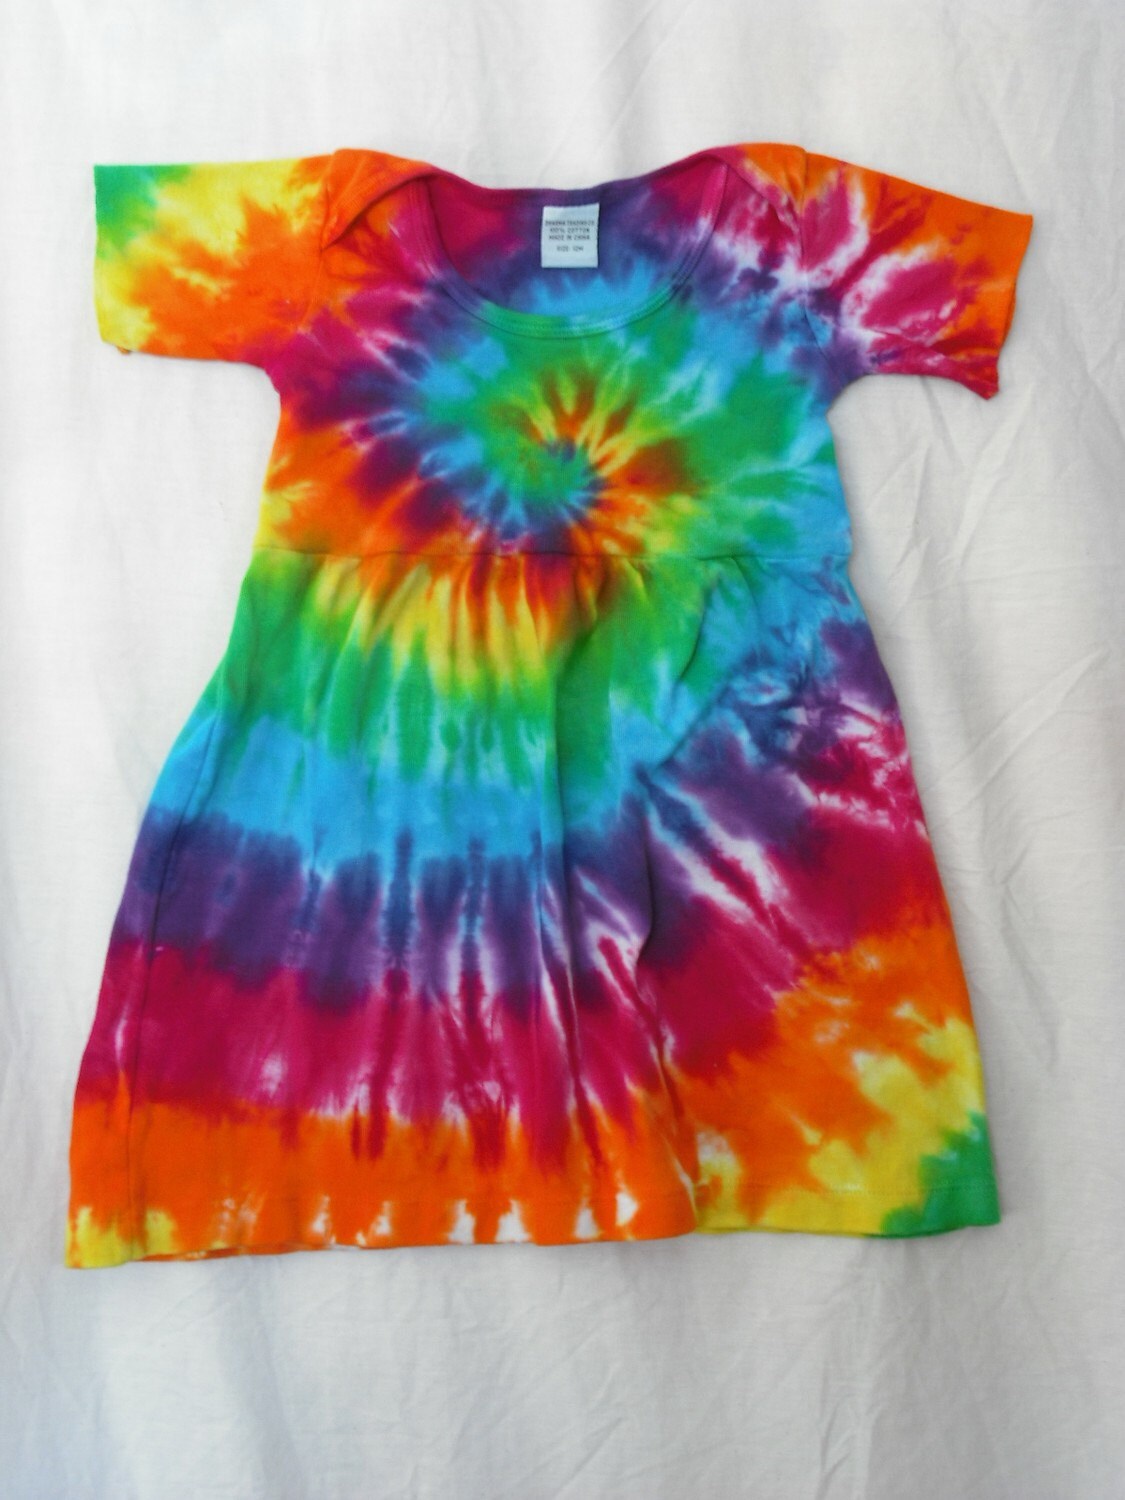 Tie dye infant to toddler dress